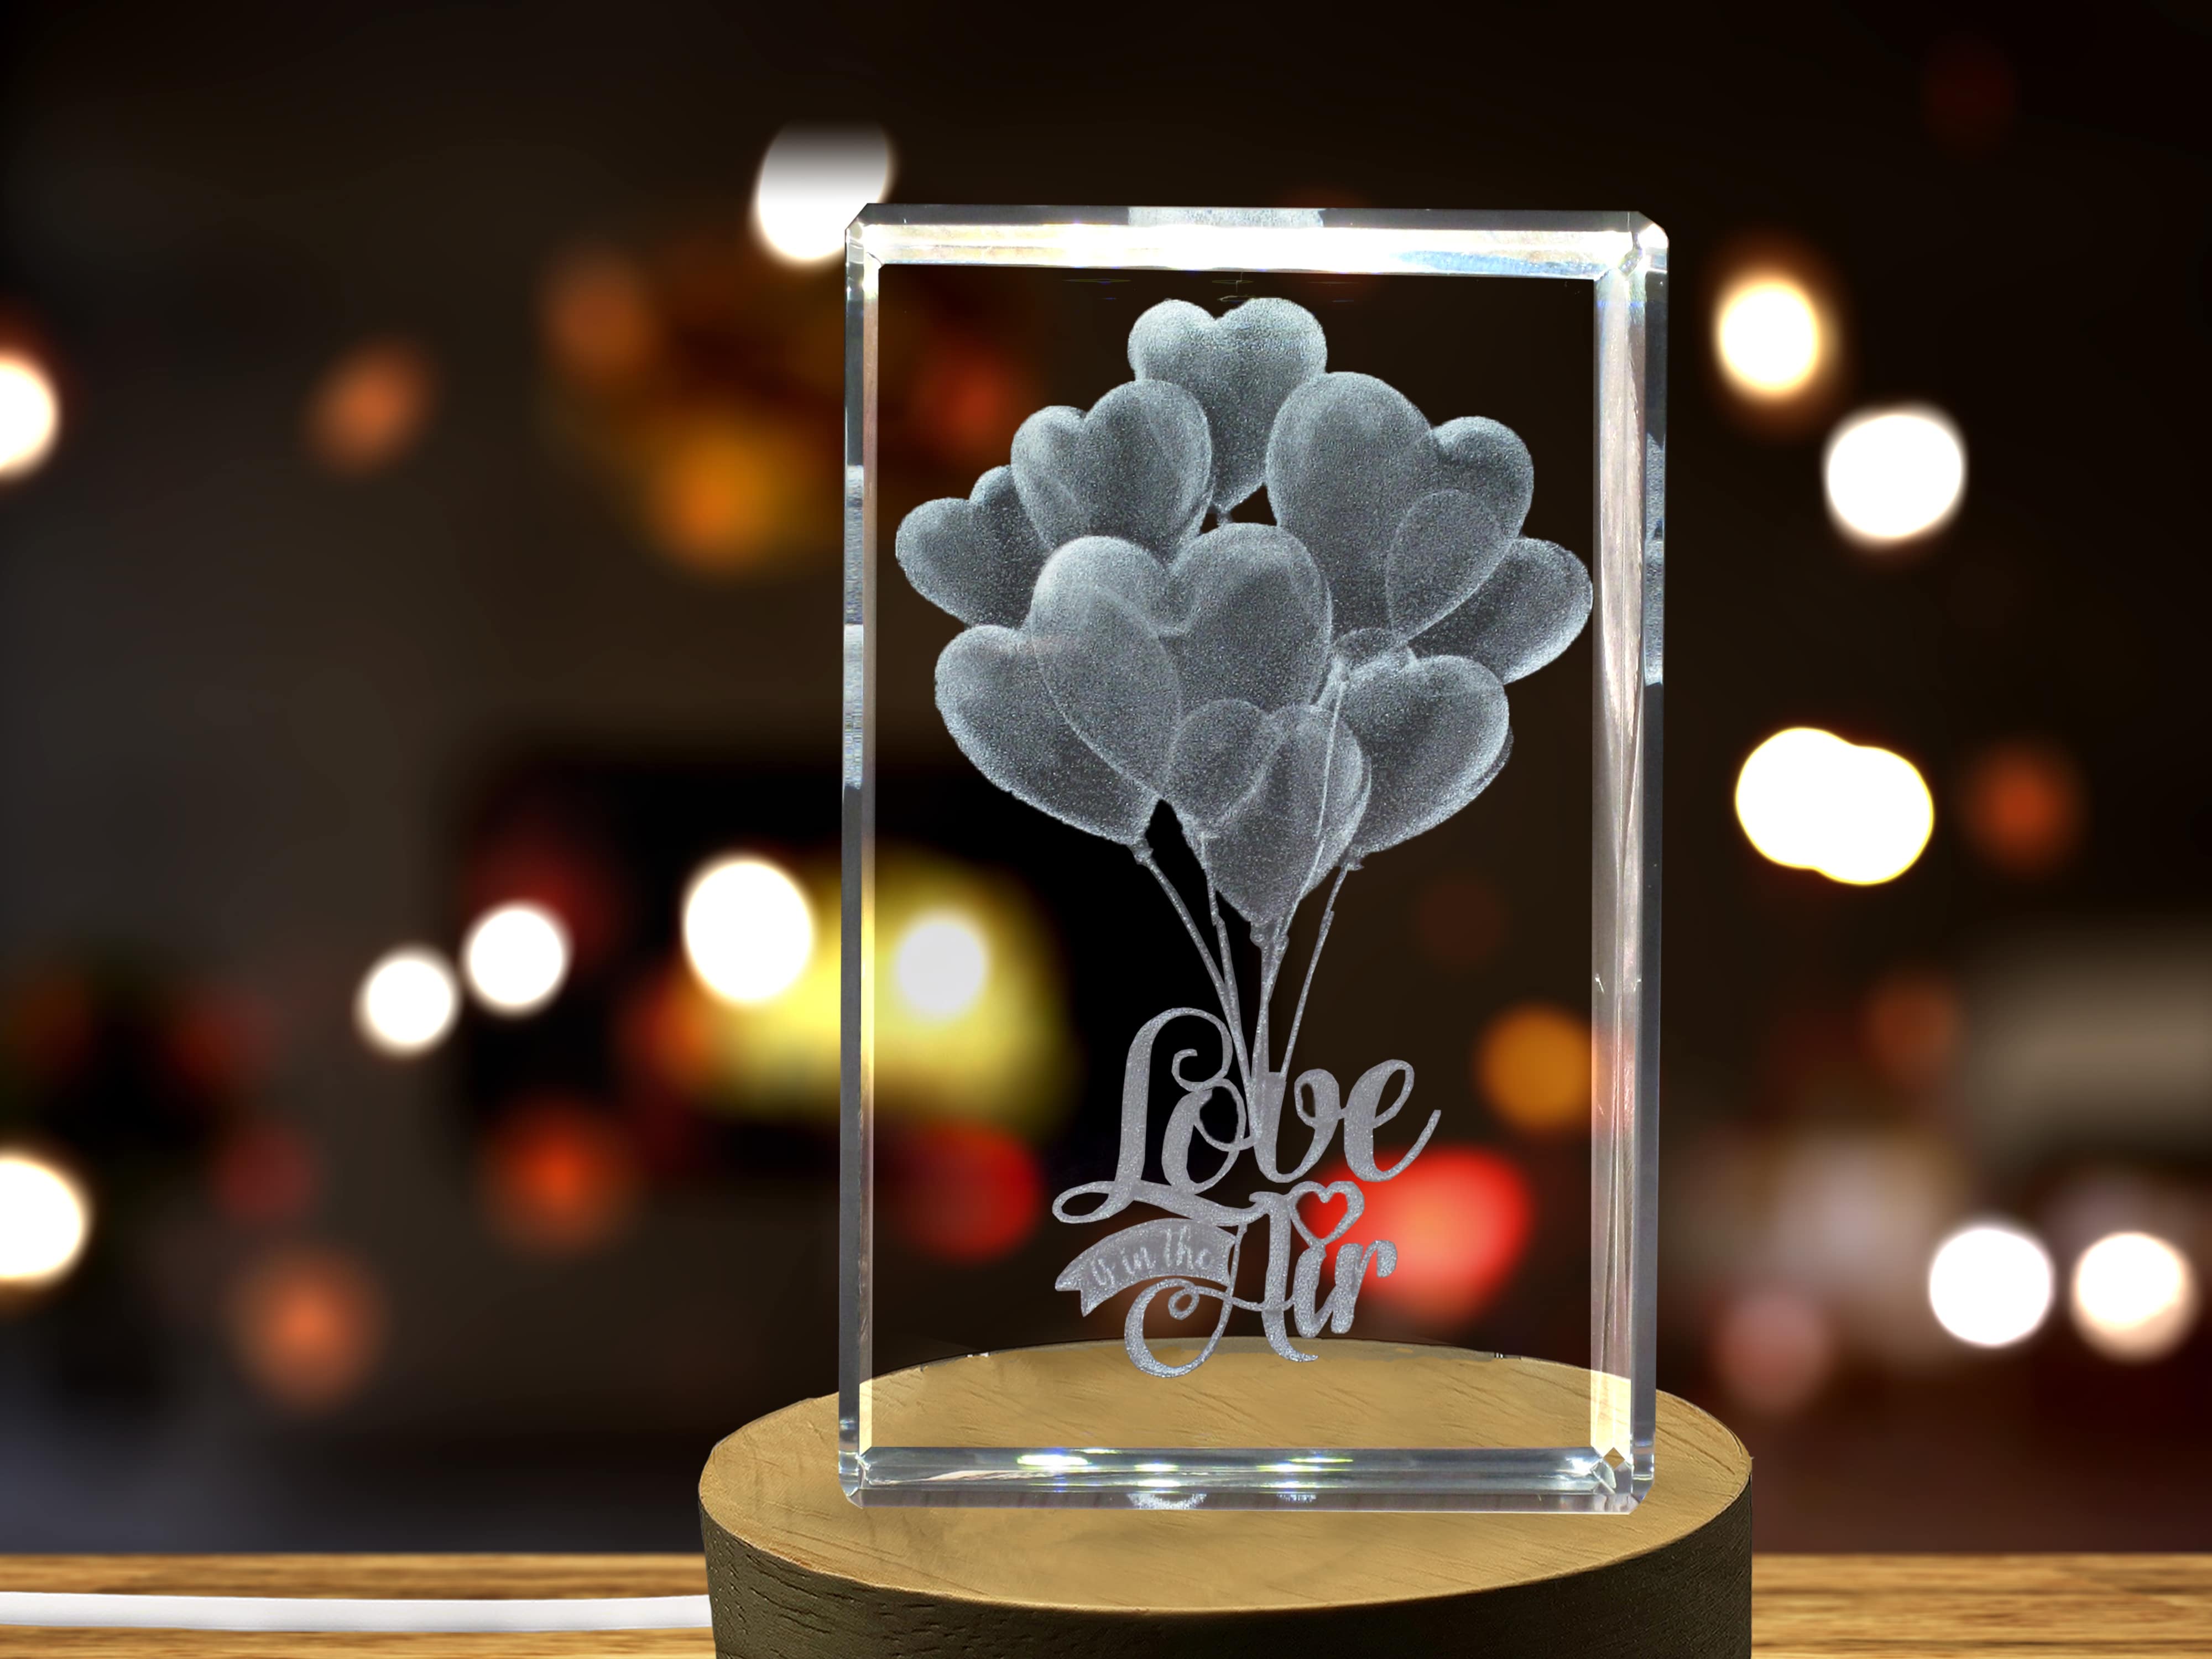 love-is-in-the-air-3d-engraved-crystal-3d-engraved-crystal-keepsake-gift-decor-collectible-souvenir